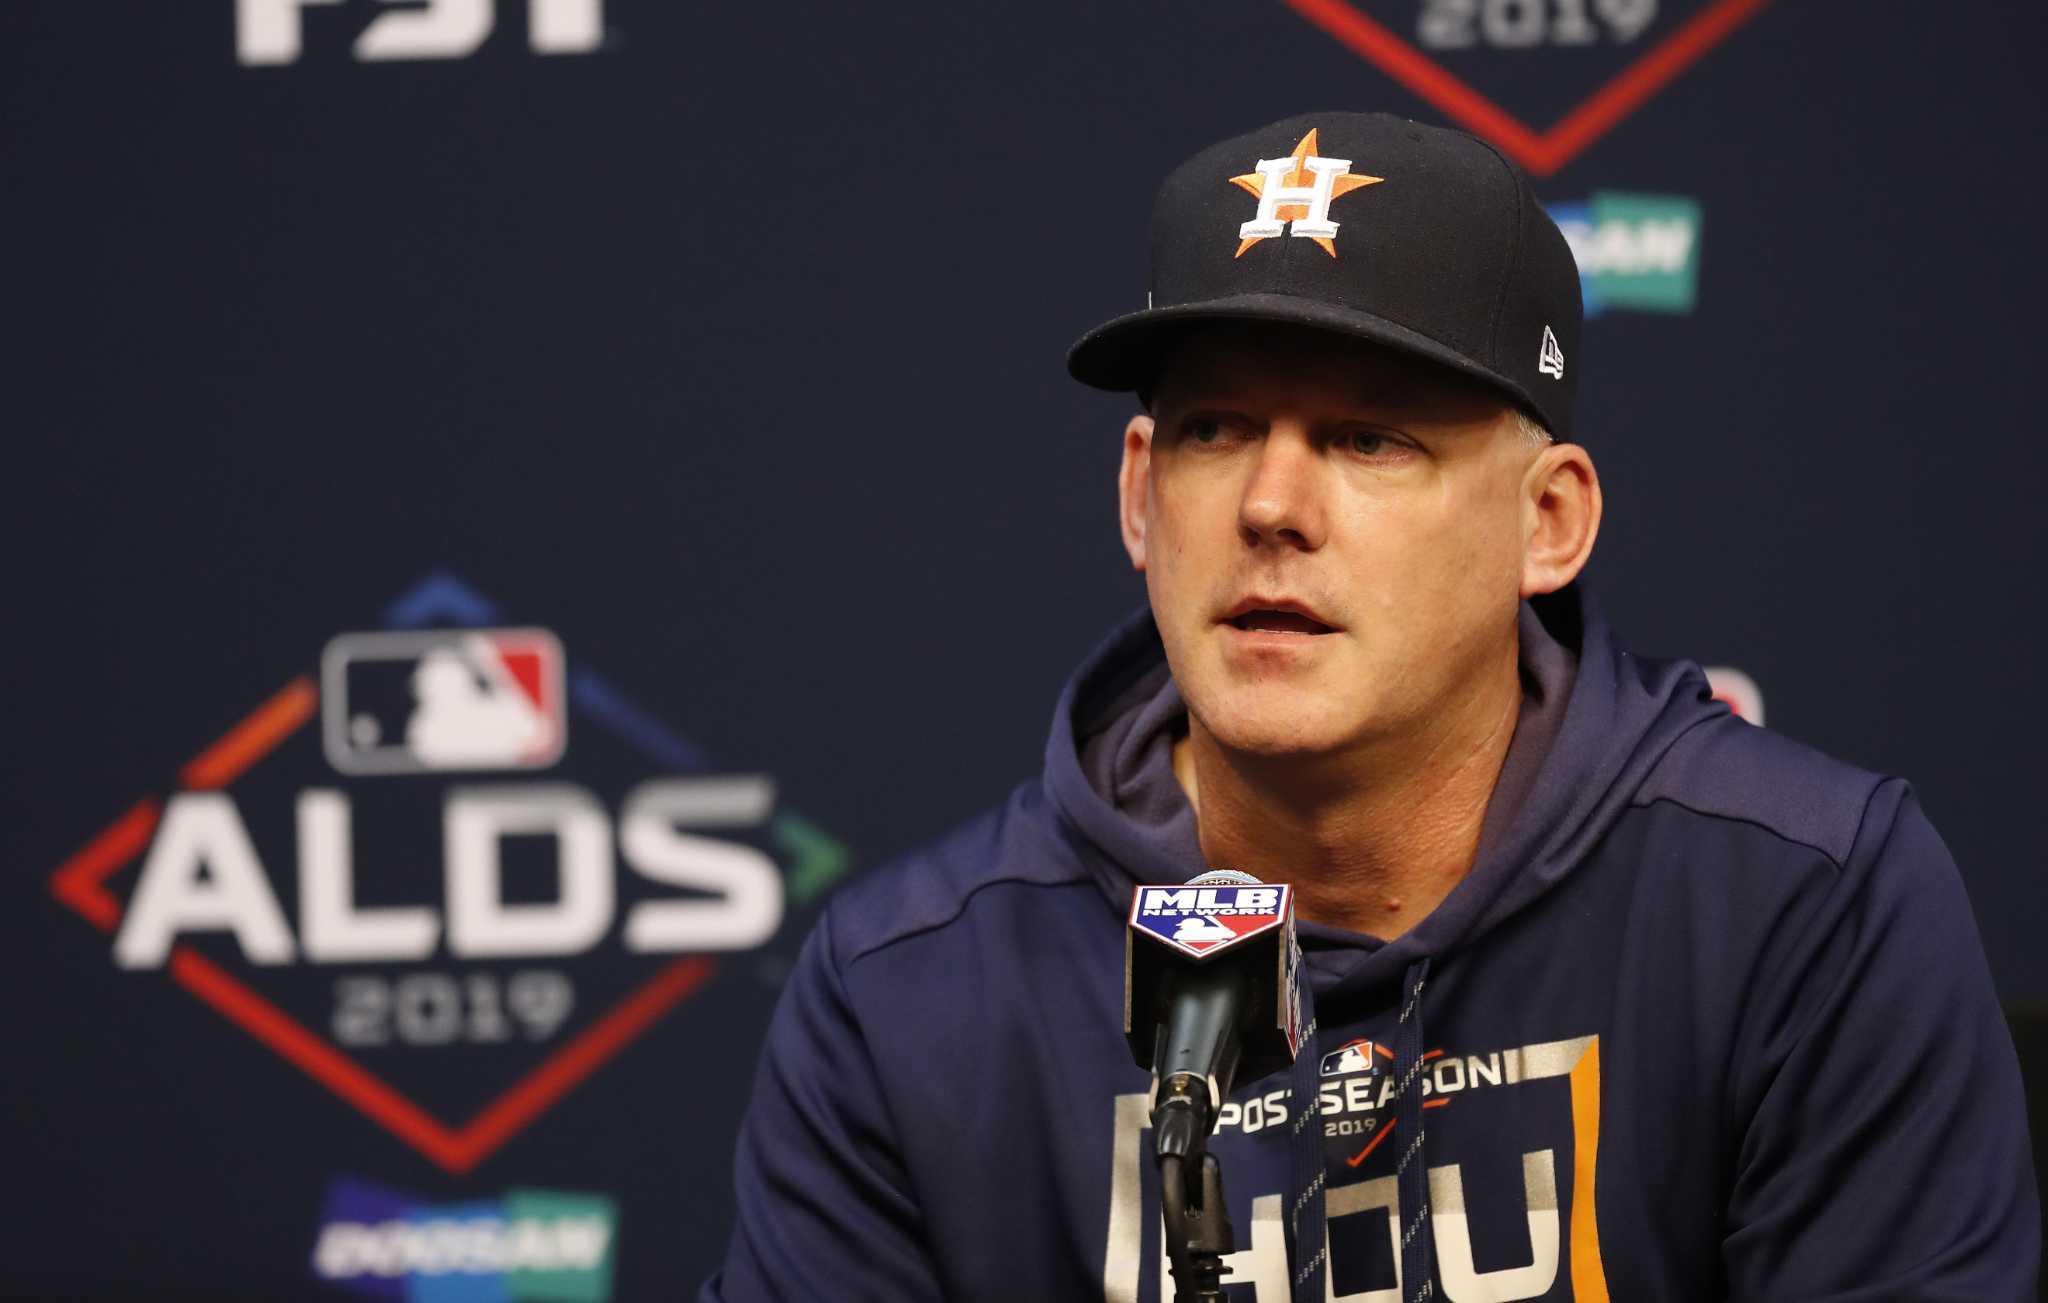 Tigers manager A.J. Hinch talks Astros, scandal and why Houston is